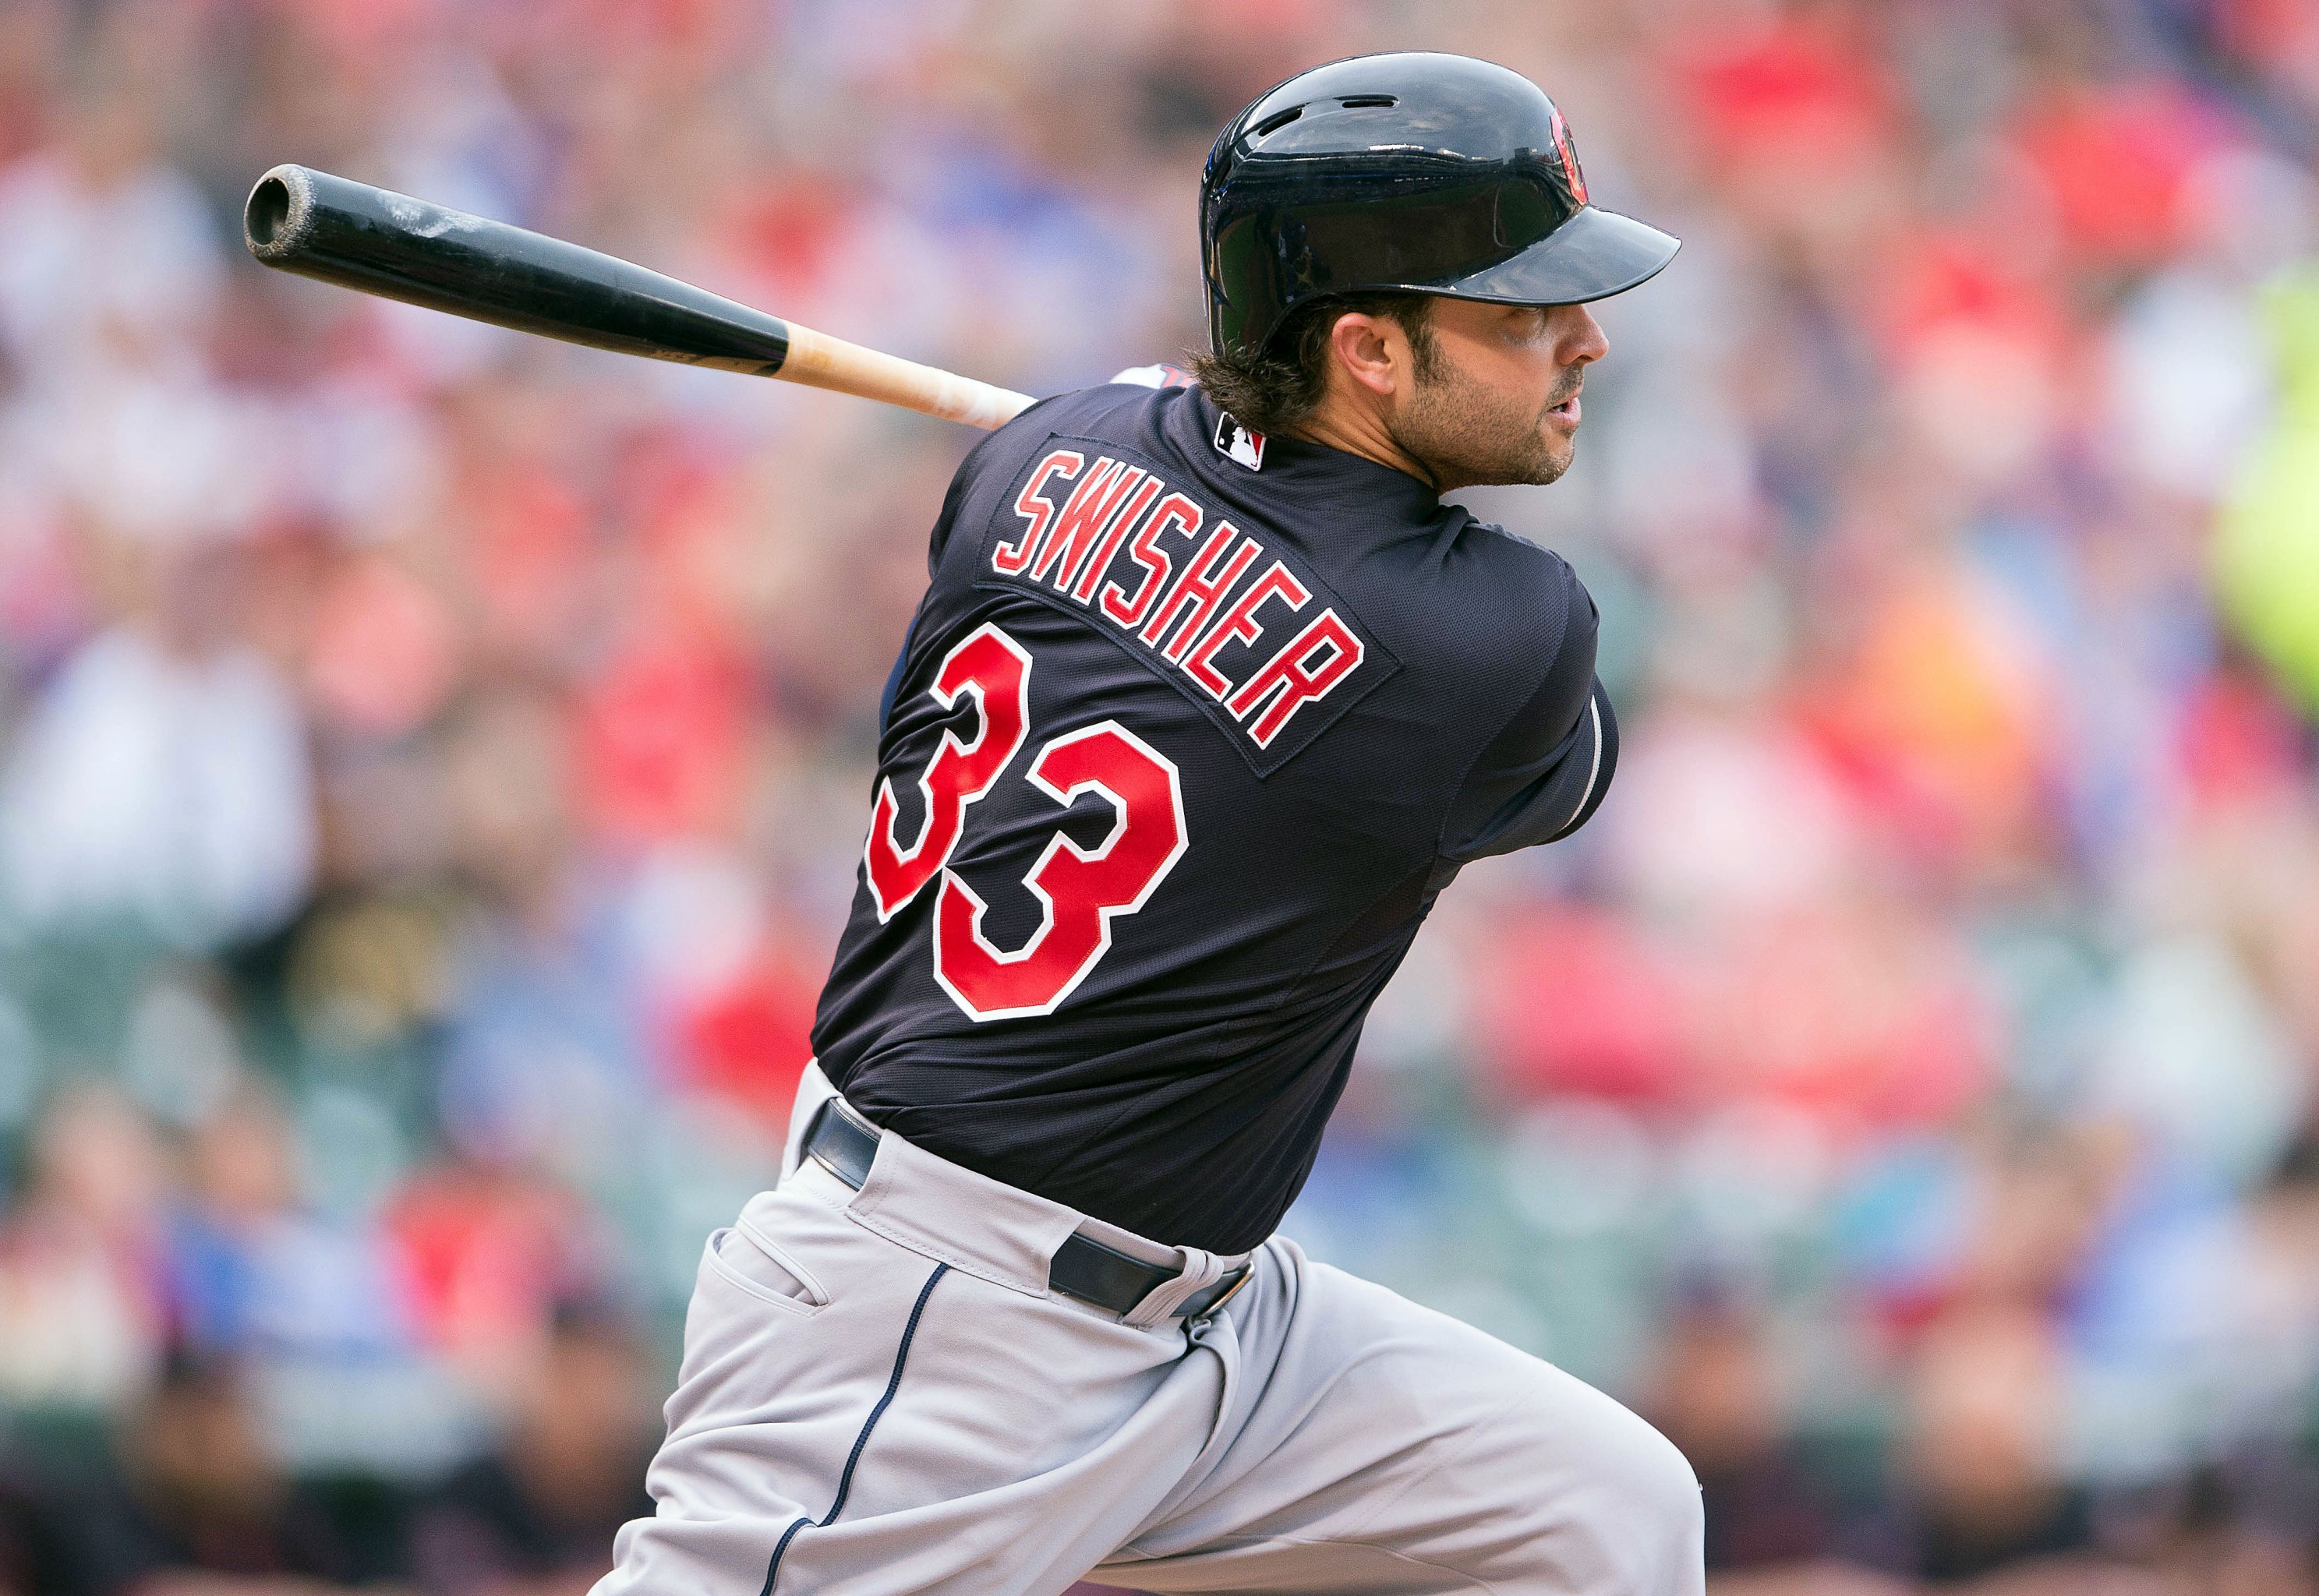 The Braves release Nick Swisher - NBC Sports